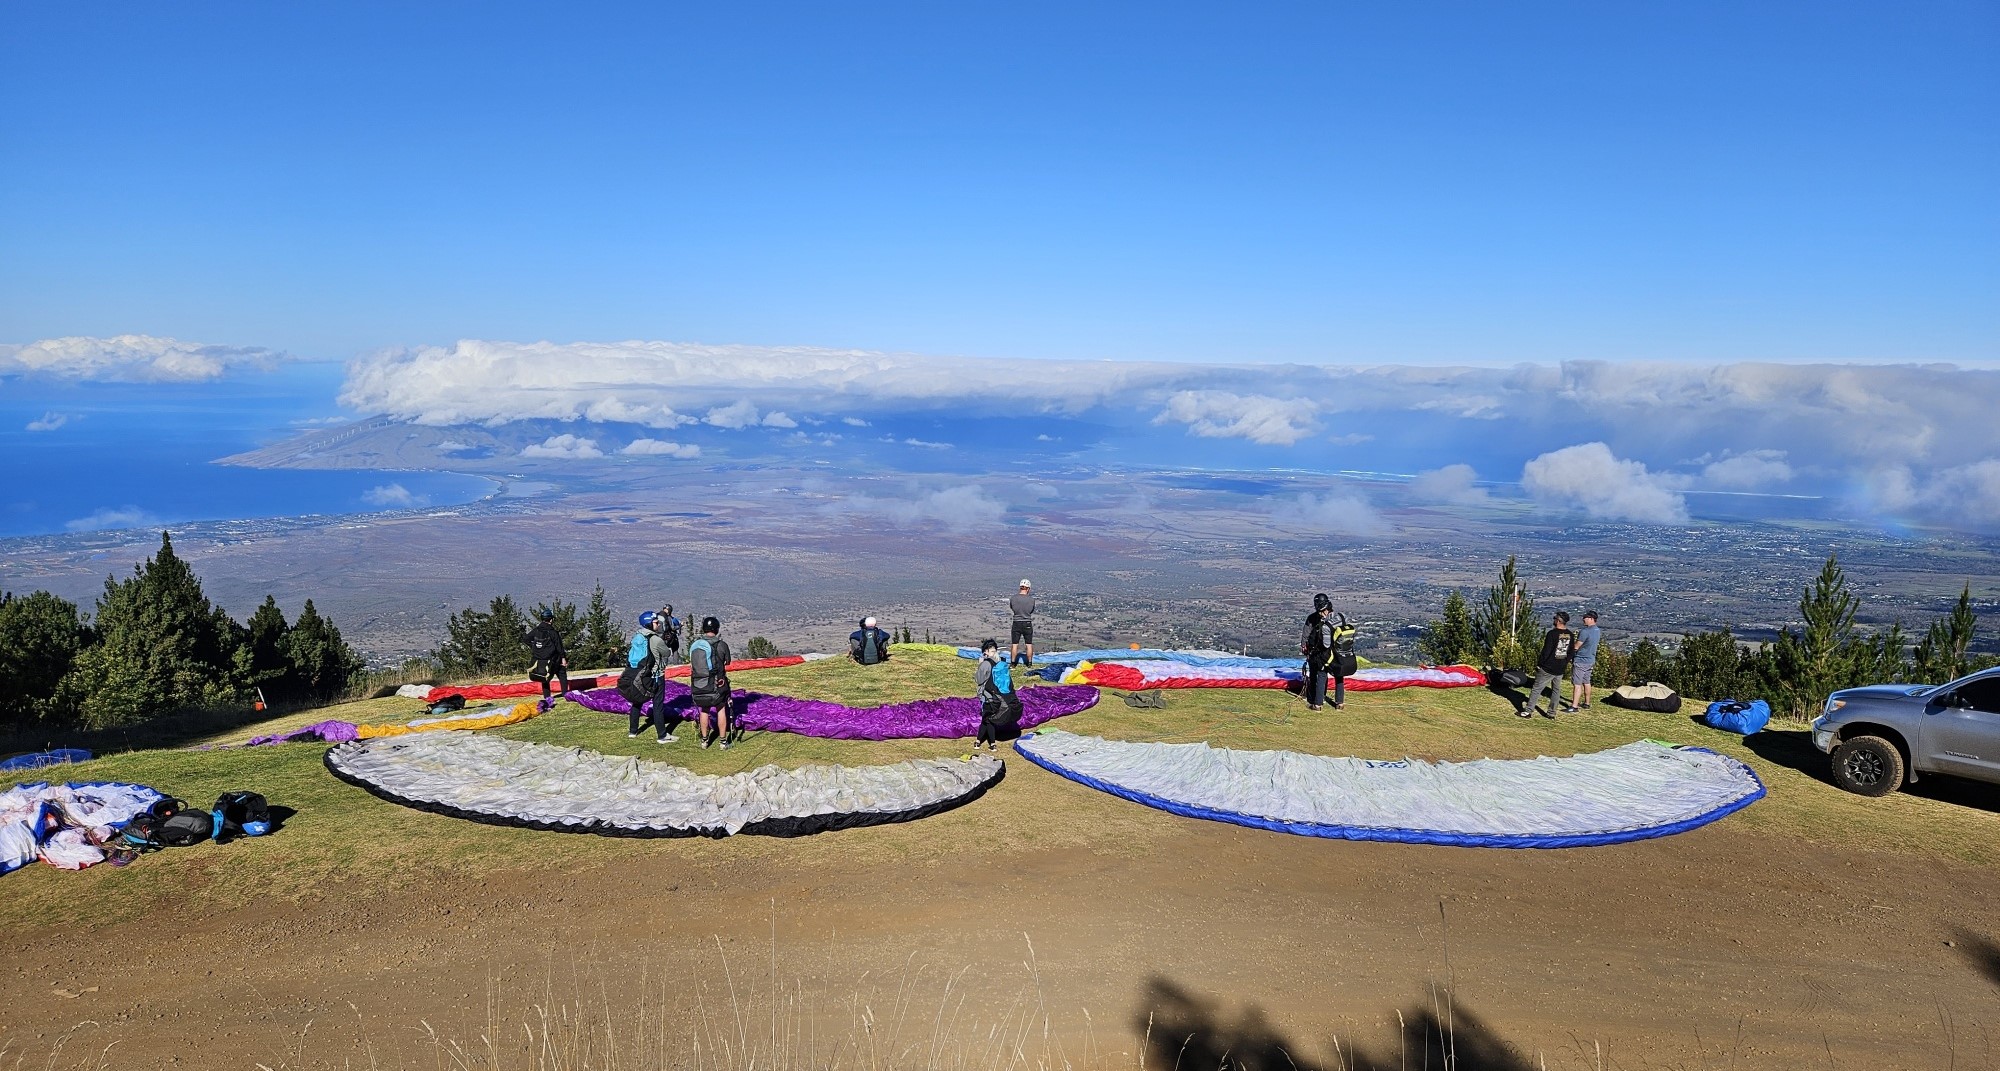 Tandem paragliders waiting to launch